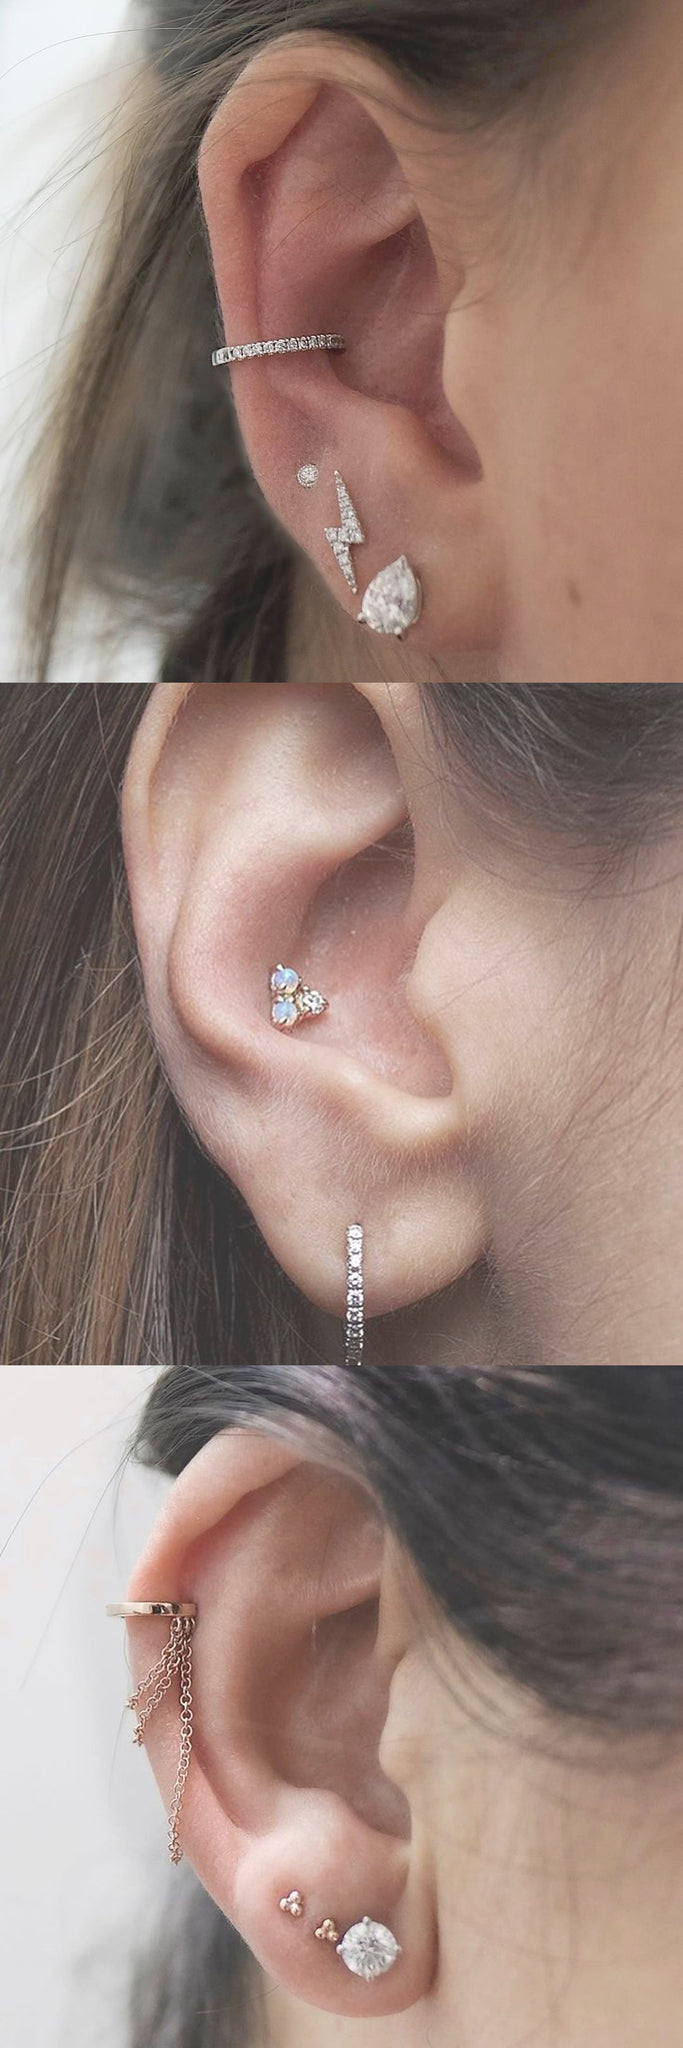 Simple Minimalistic Multiple Ear Piercing Jewelry at MyBodiArt.com - Fake Crystal Conch Ring - Flower Conch Stud - Rose Gold Cartilage Chain Earring 